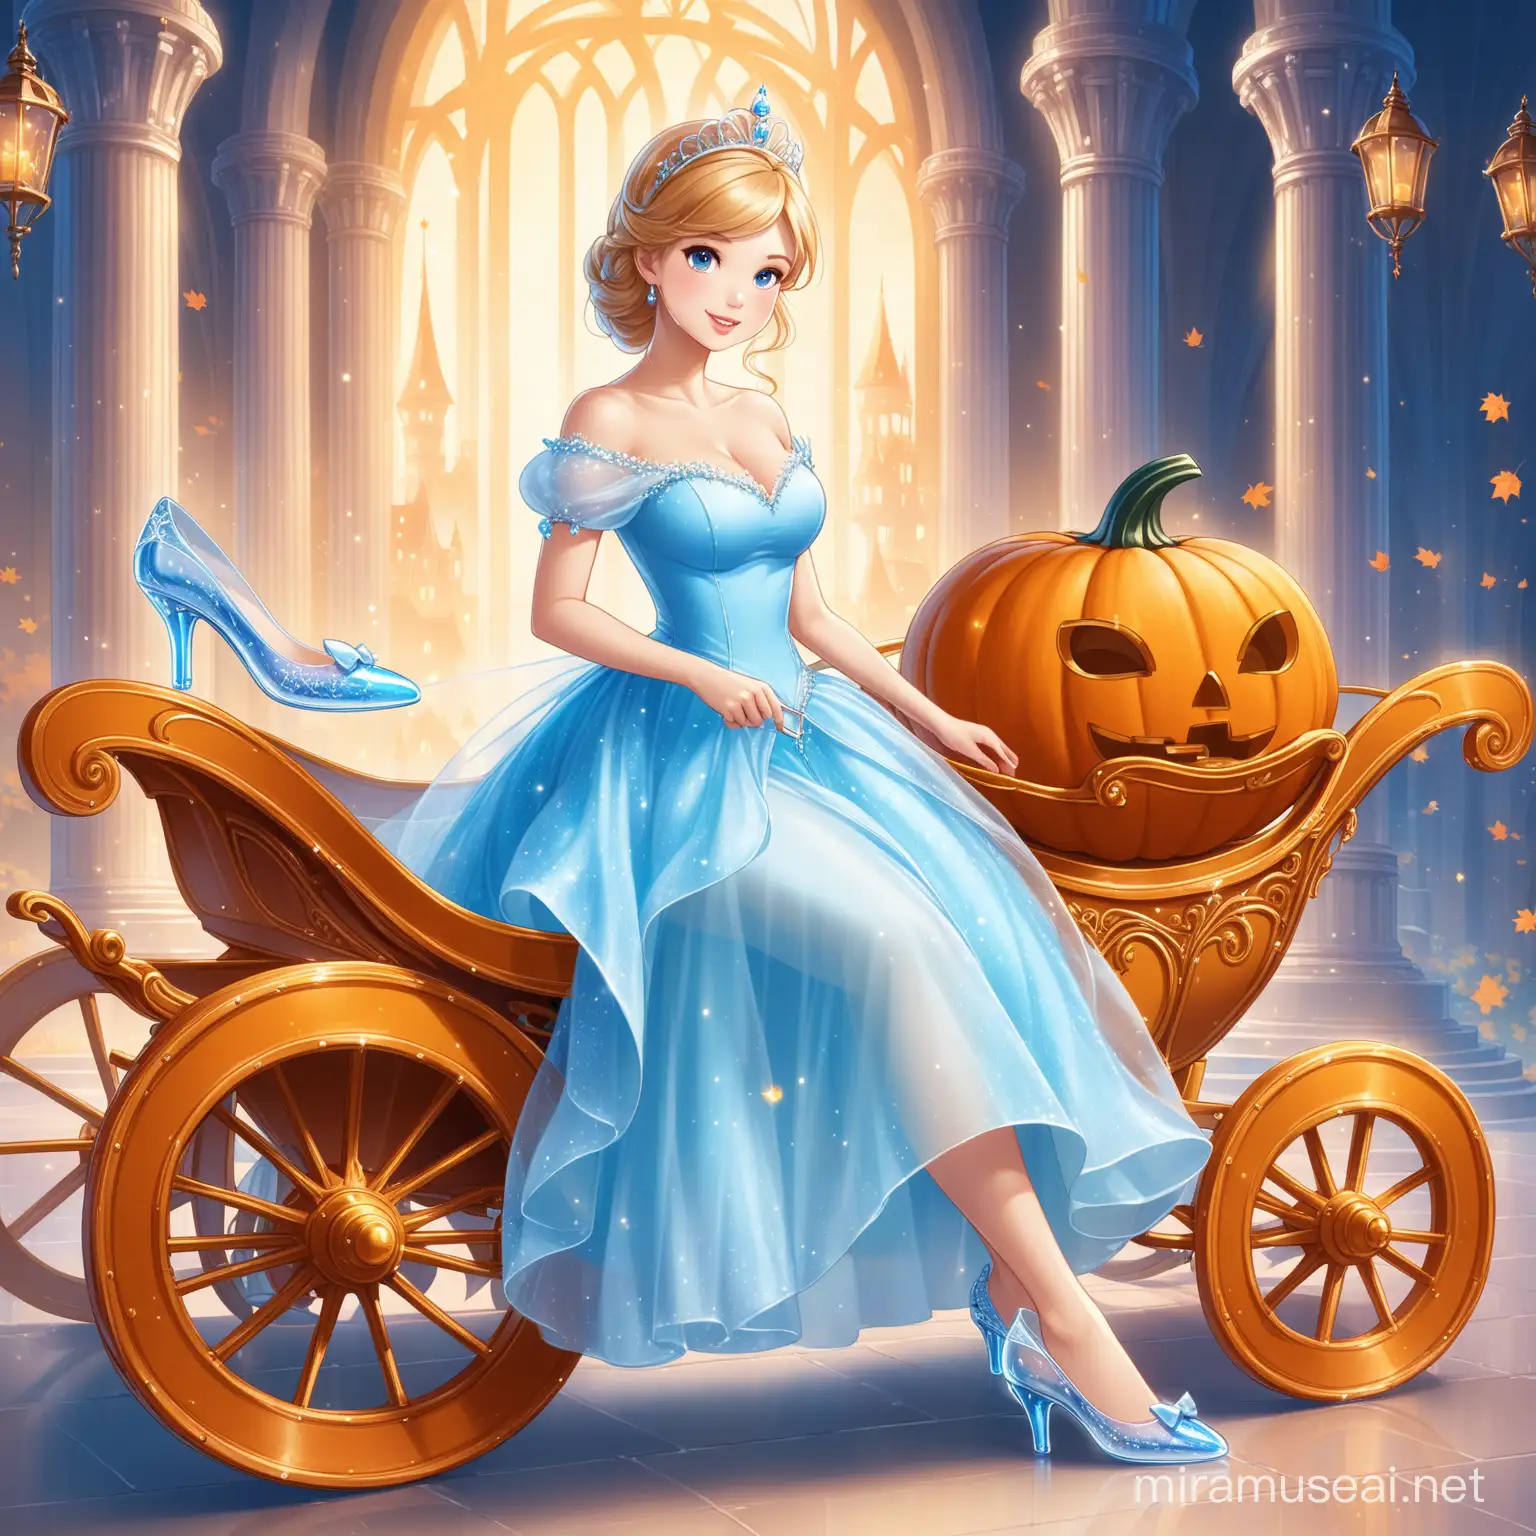 Fairytale Girl with Glass Slipper and Pumpkin Carriage